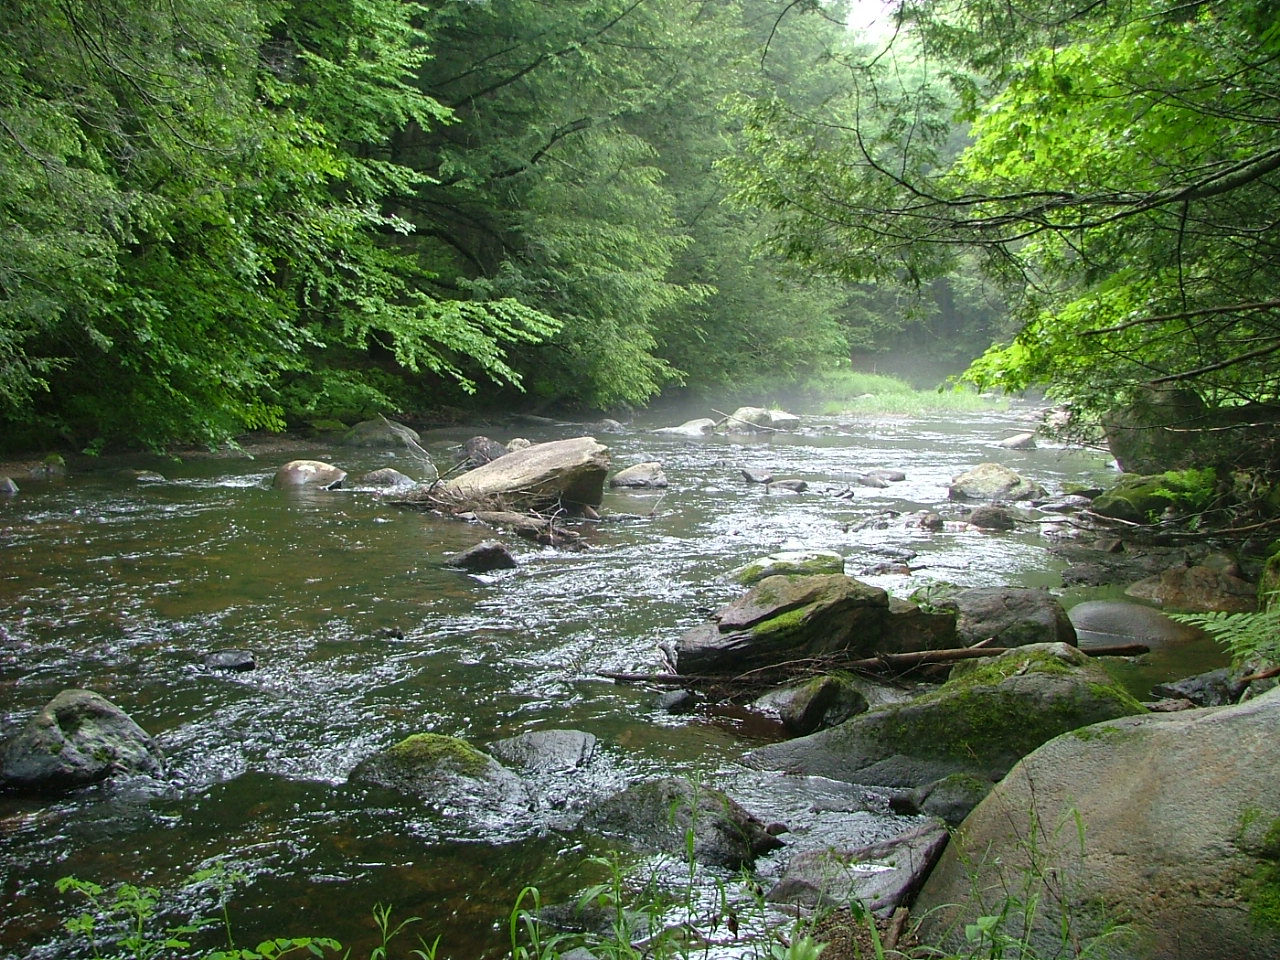 Because our streams work hard! The Farmington River, like many CT rivers, serves multiple purposes for multiple users: drinking water, hydropower, ...